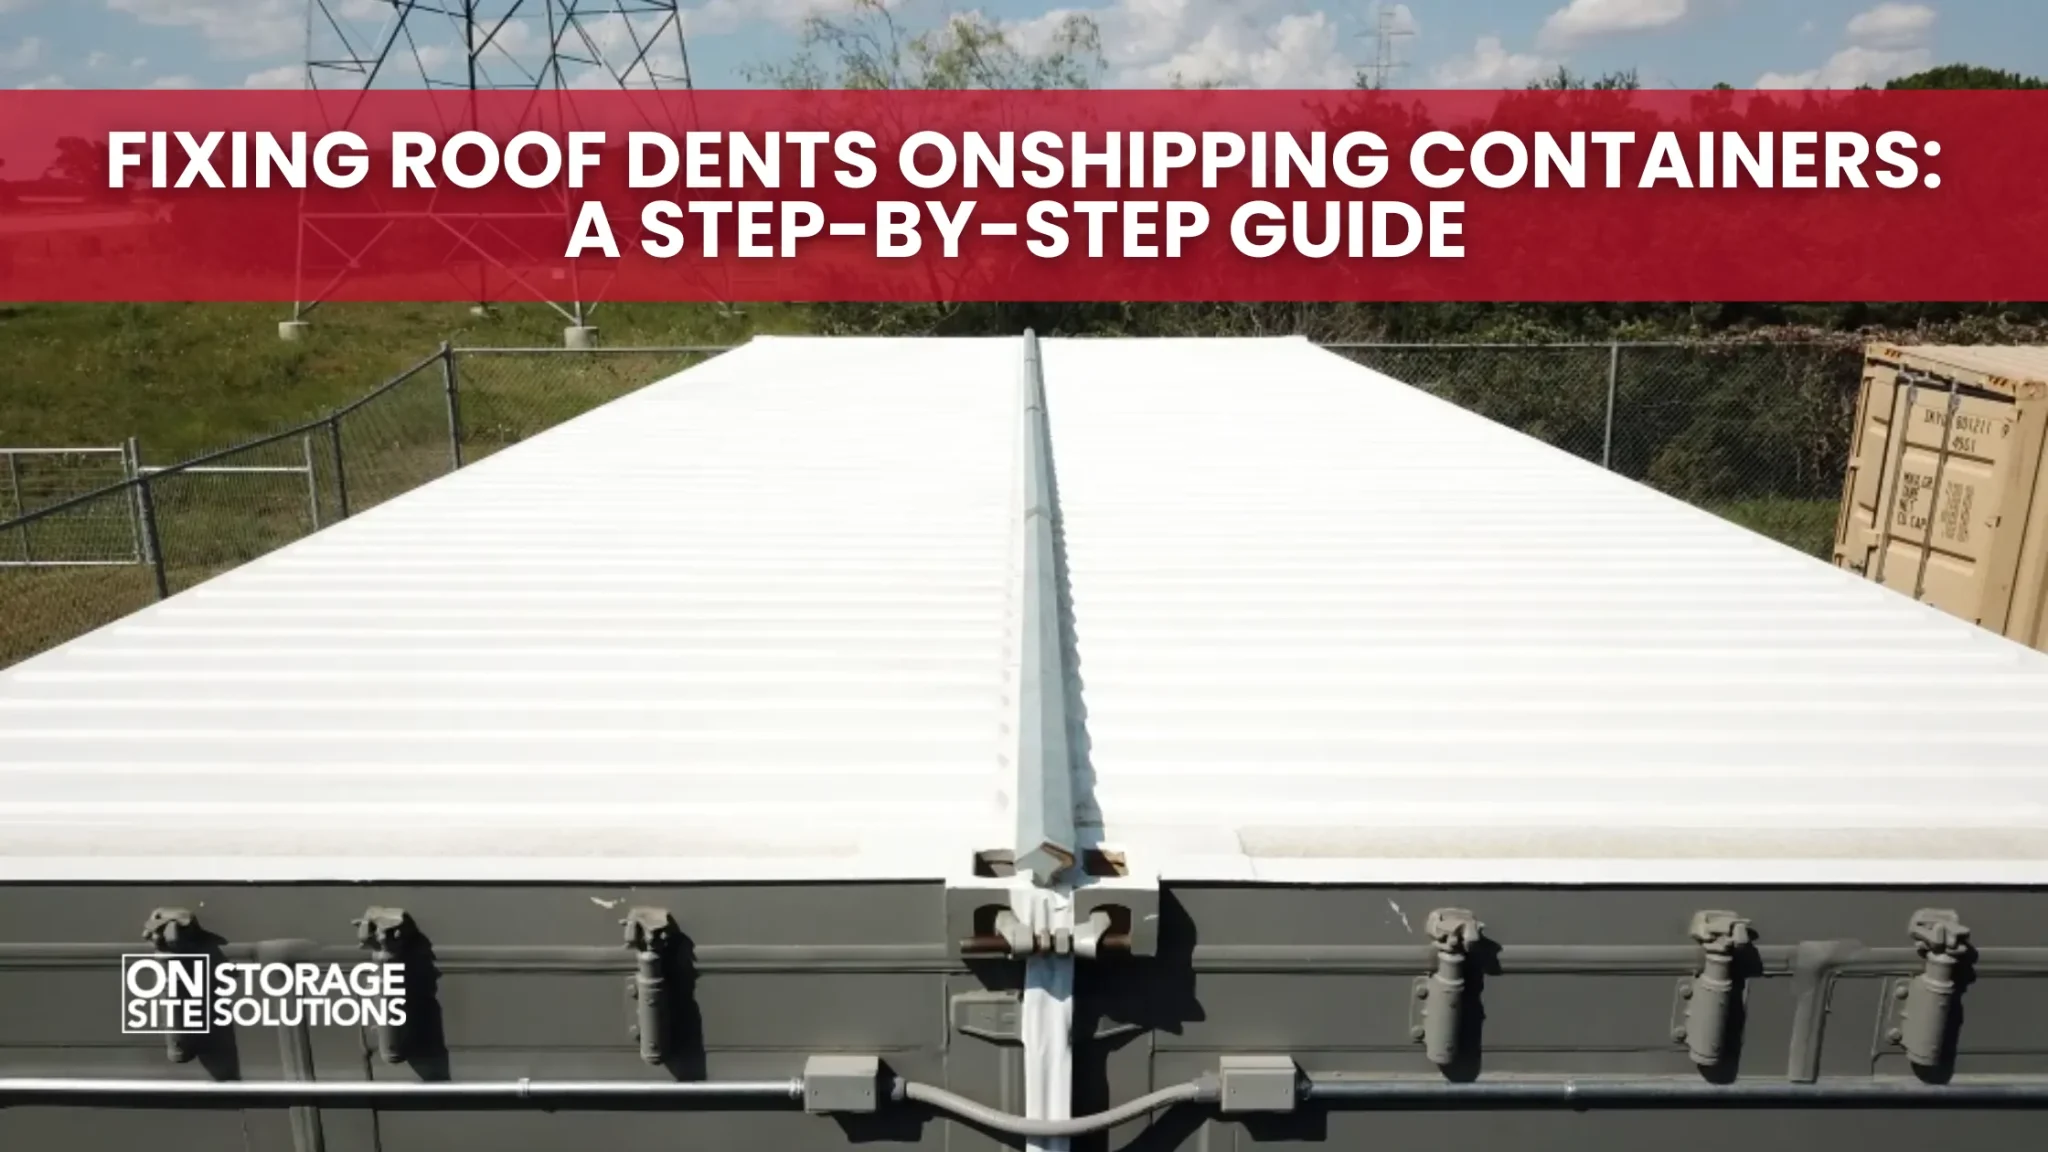 Fixing Roof Dents on Shipping Containers: A Step-by-Step Guide